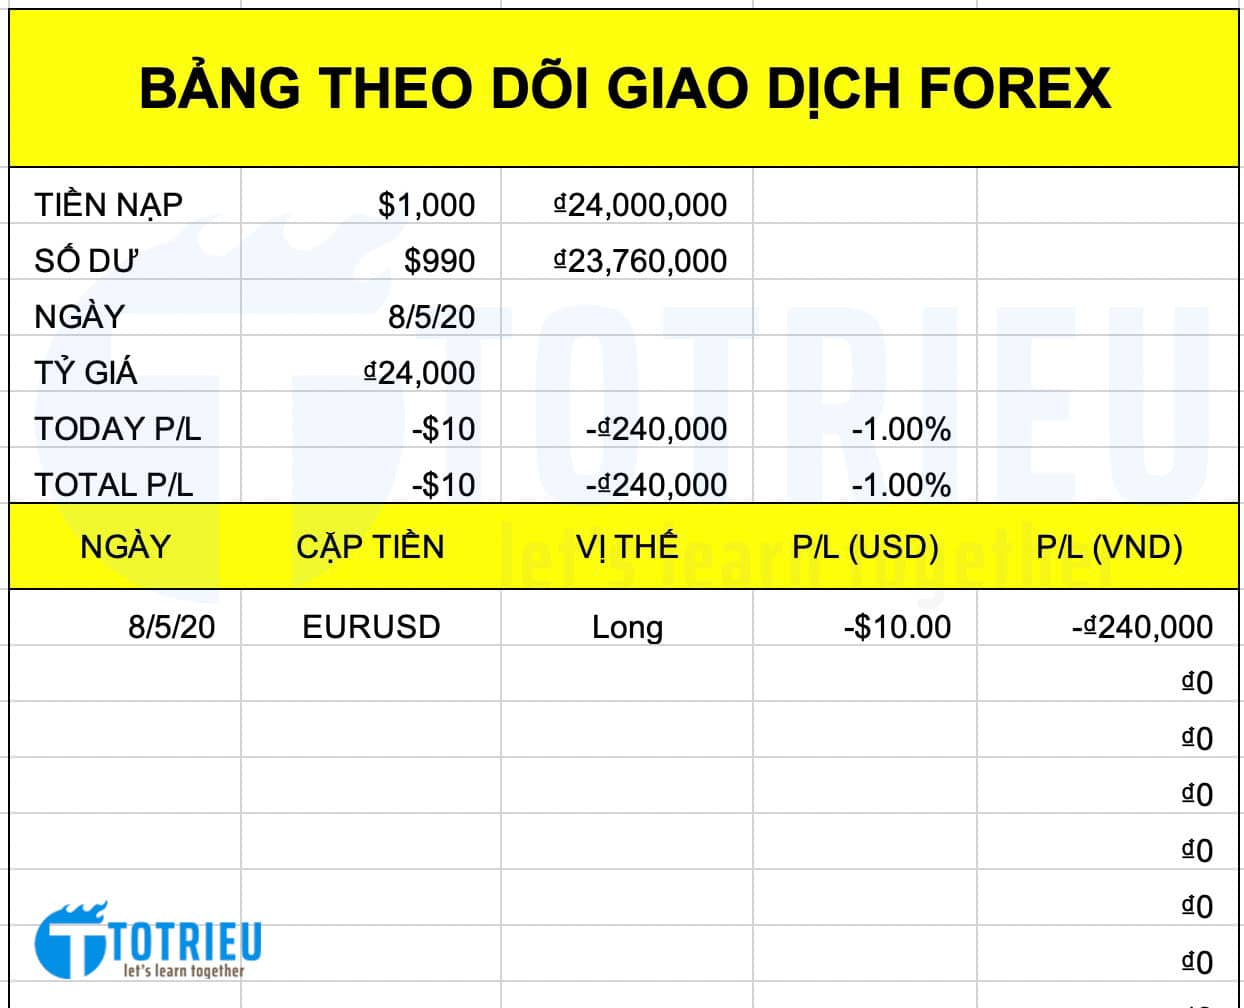 File theo dõi kết quả giao dịch Forex bằng Excel